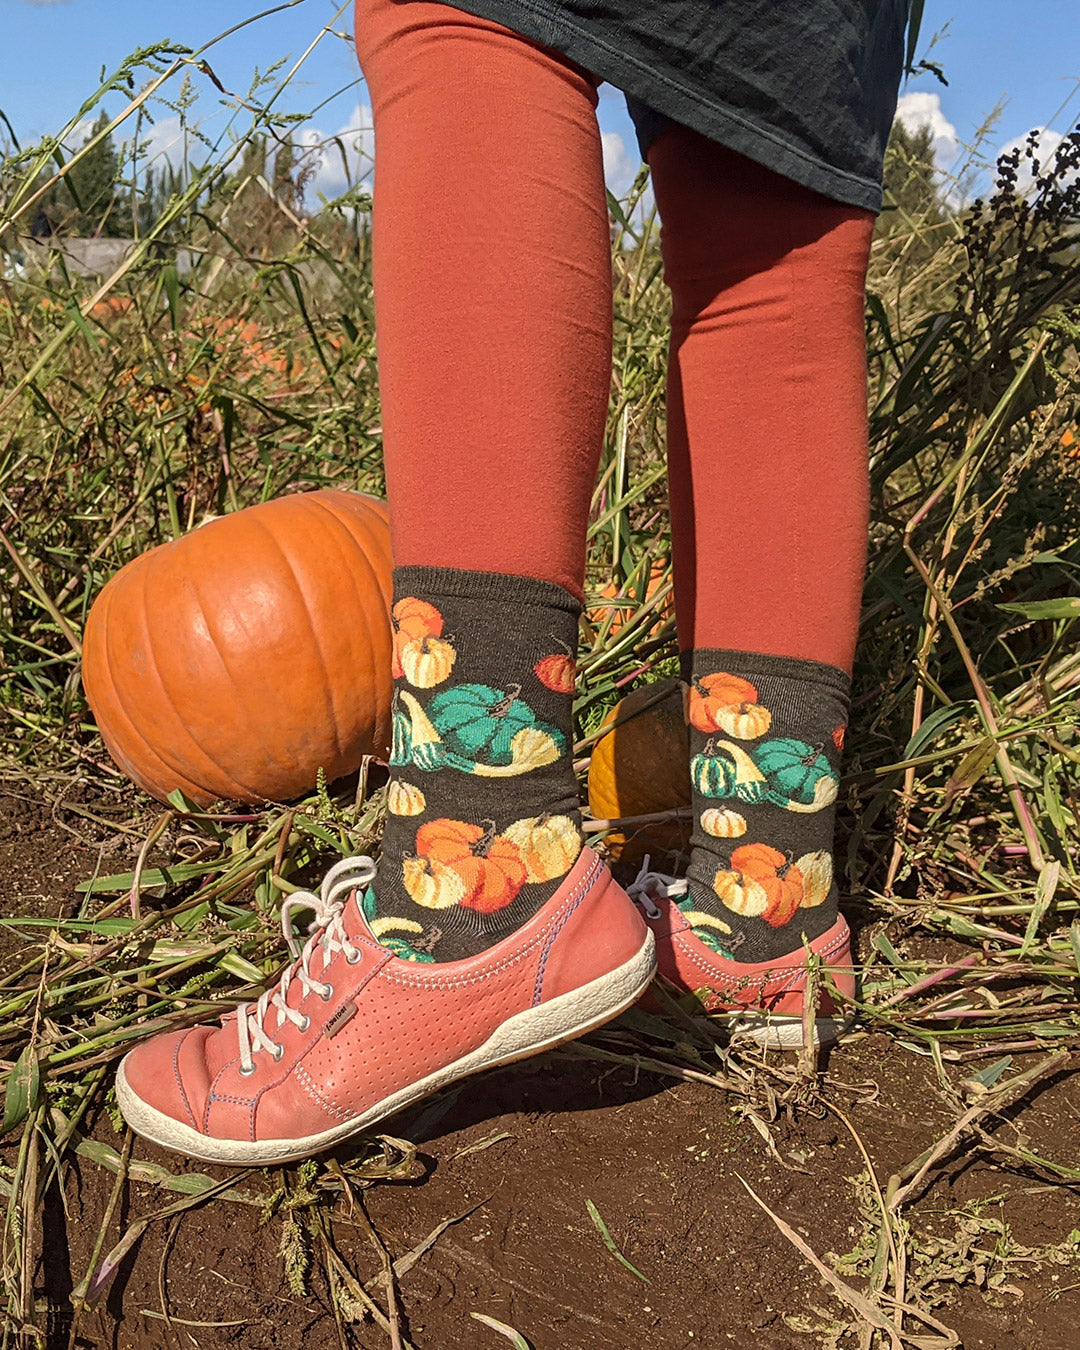 Andrea wears Oh My Gourd Socks by ModSocks with orange shoes and stands in a pumpkin patch